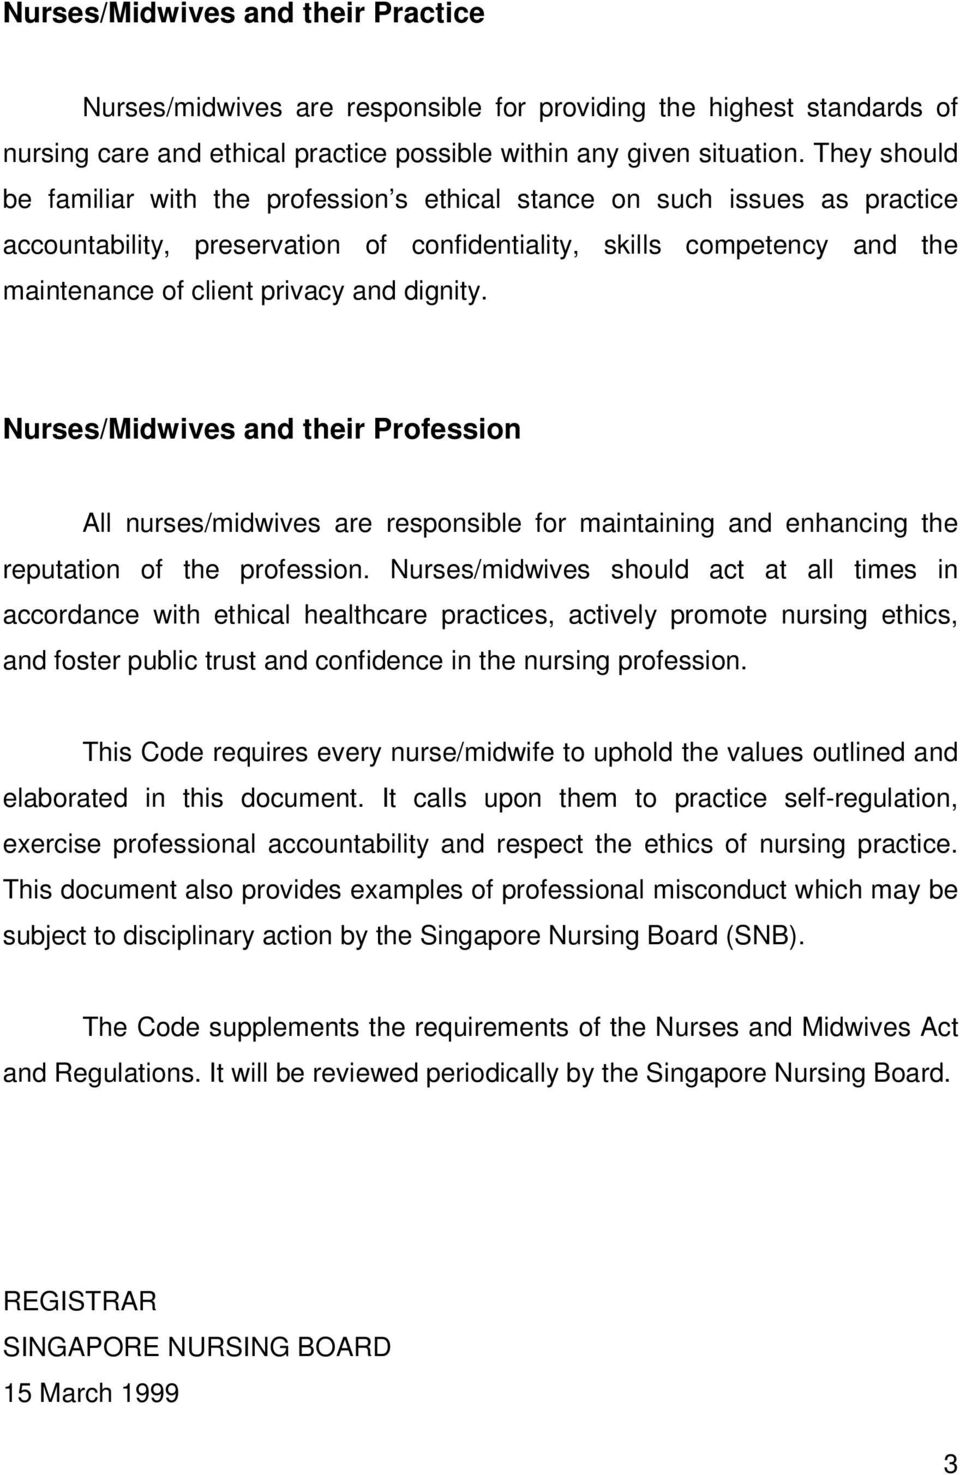 dignity. Nurses/Midwives and their Profession All nurses/midwives are responsible for maintaining and enhancing the reputation of the profession.